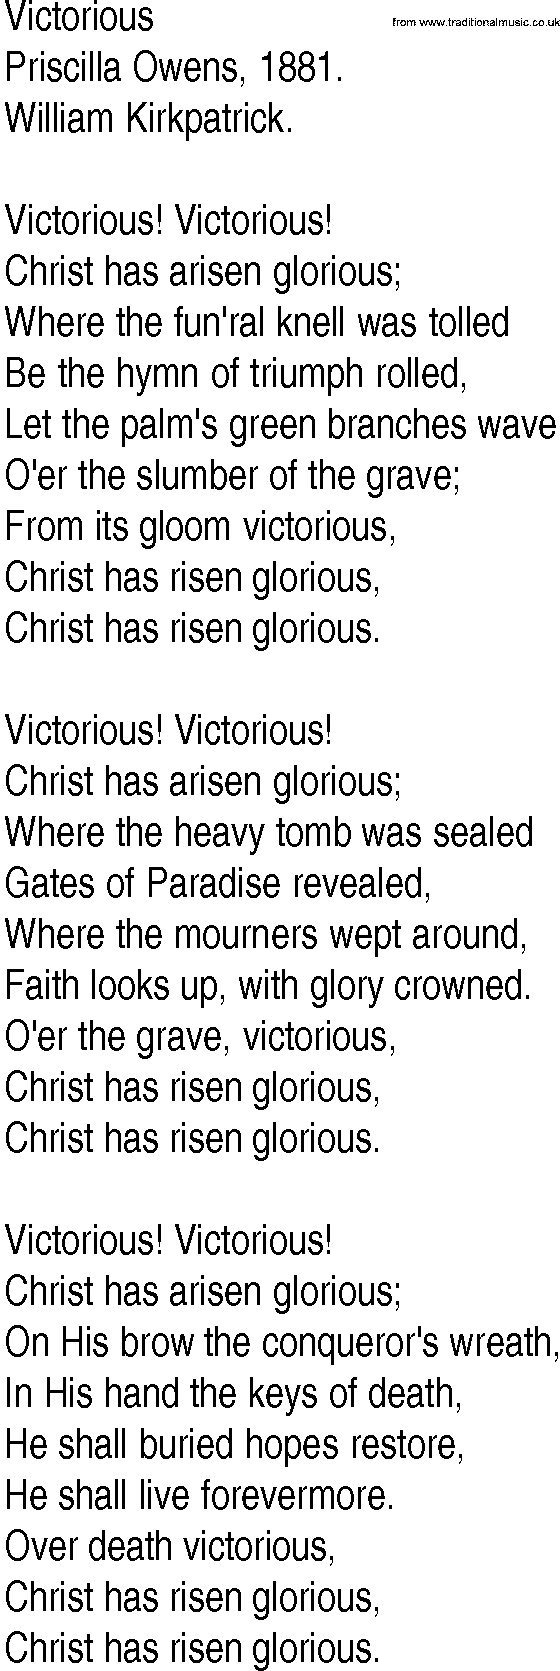 Hymn and Gospel Song: Victorious by Priscilla Owens lyrics